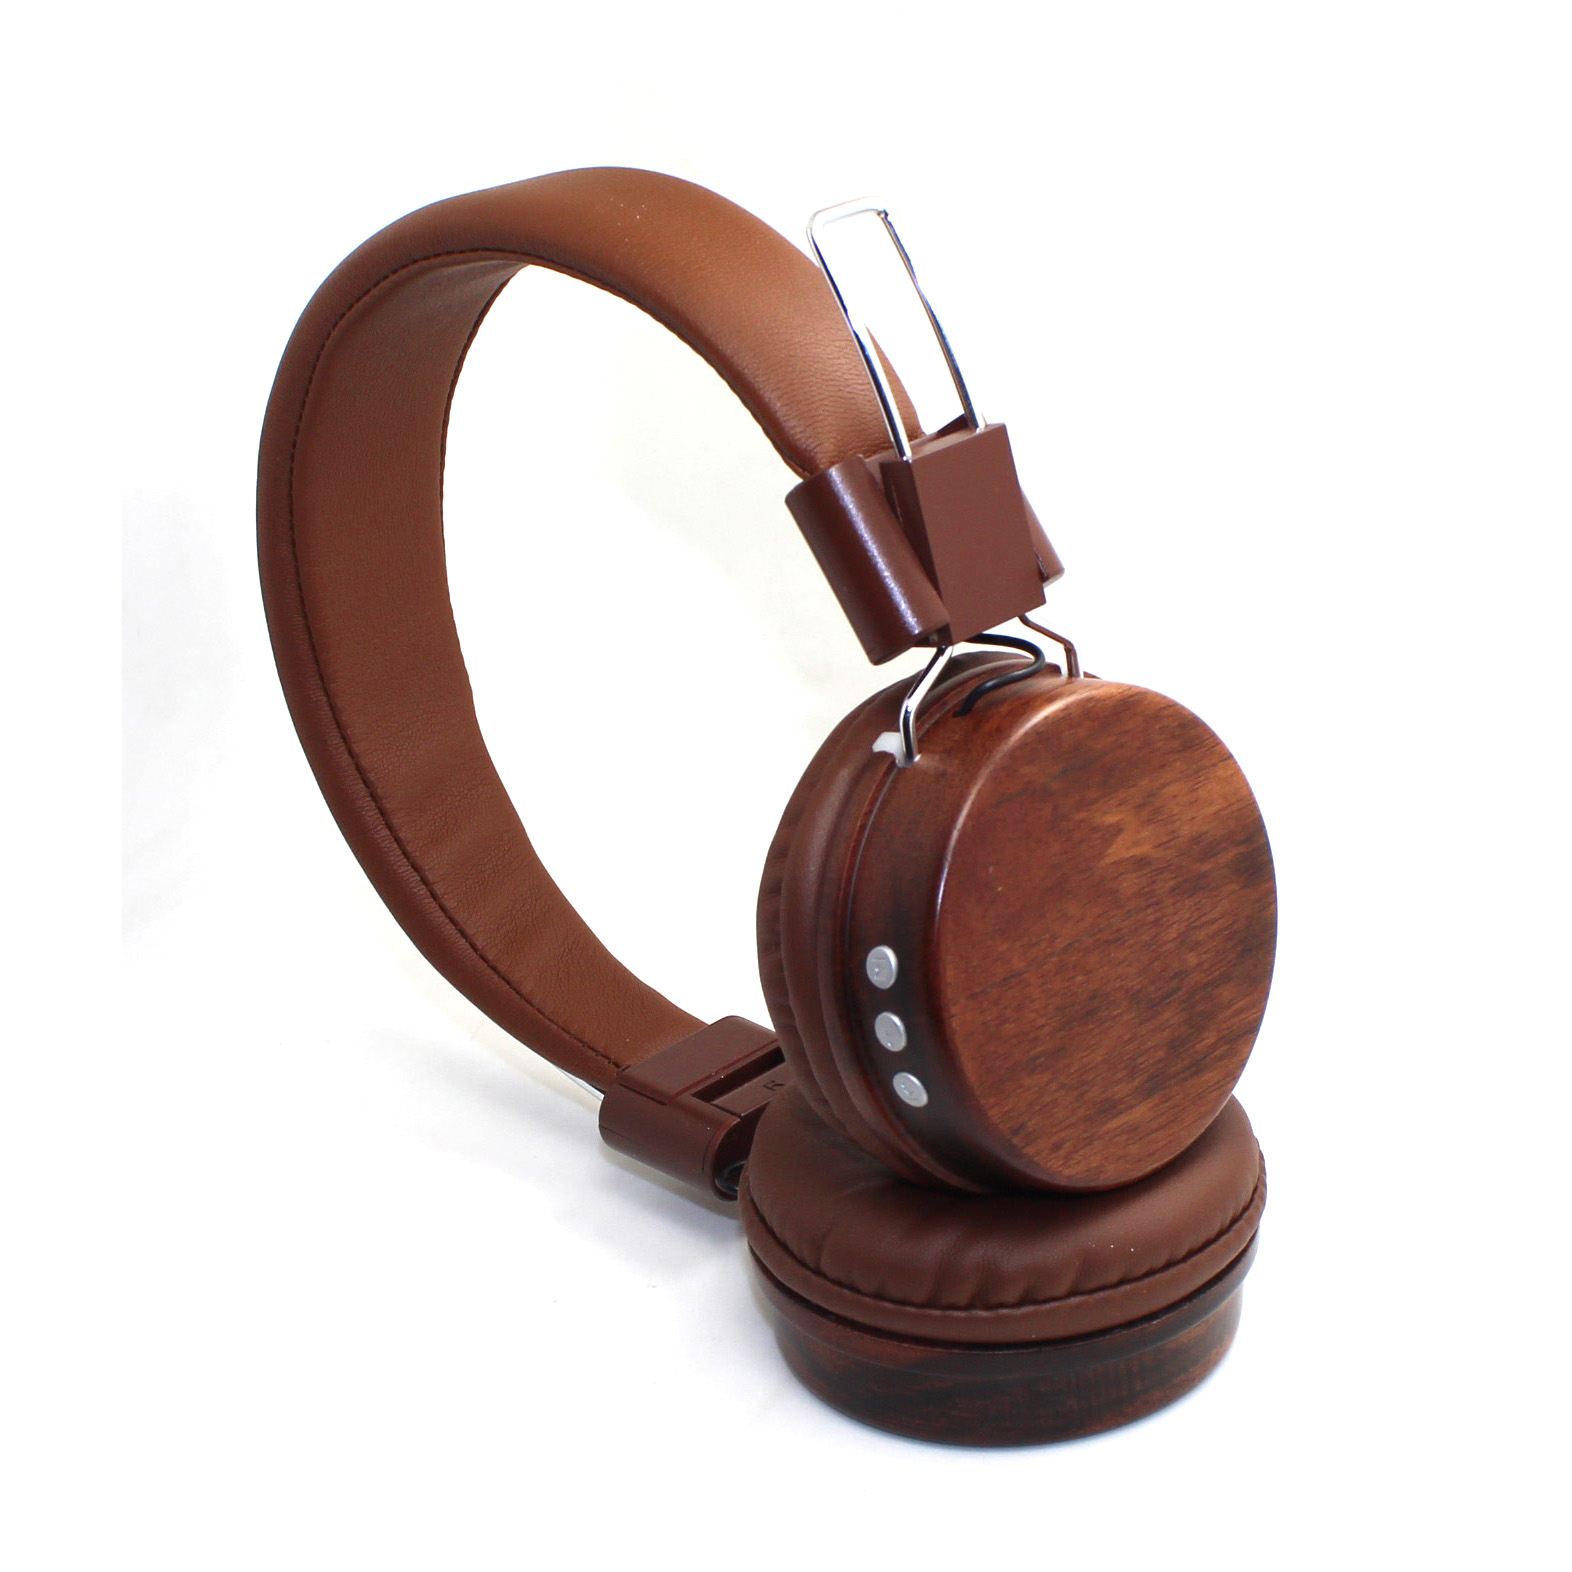 OEM-BL158 bluetooth headphone stand wood call center With Discount